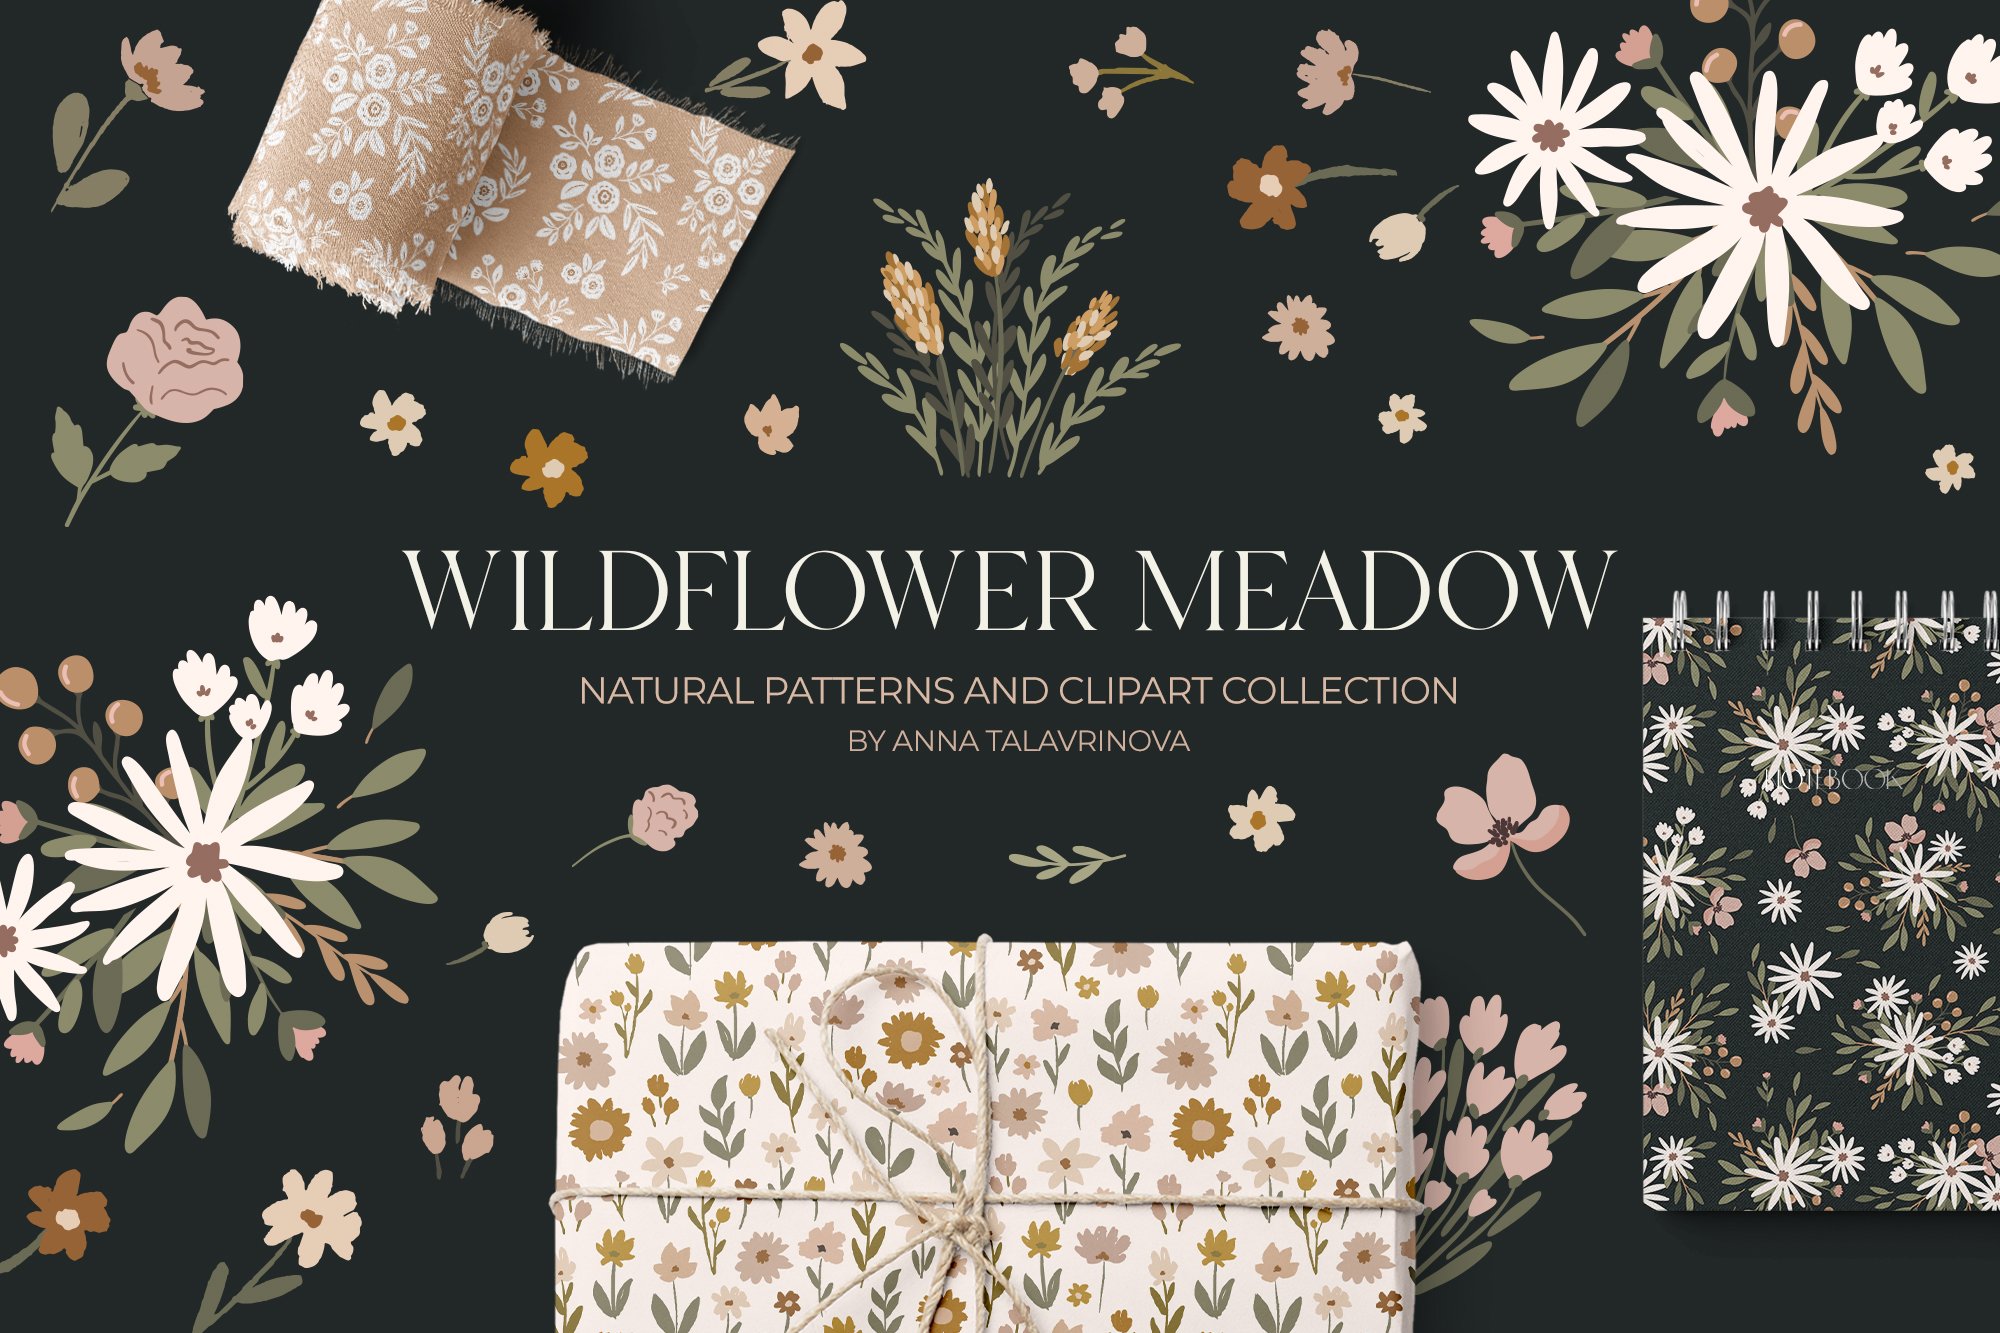 Wildflower Meadow pattern & clipart cover image.